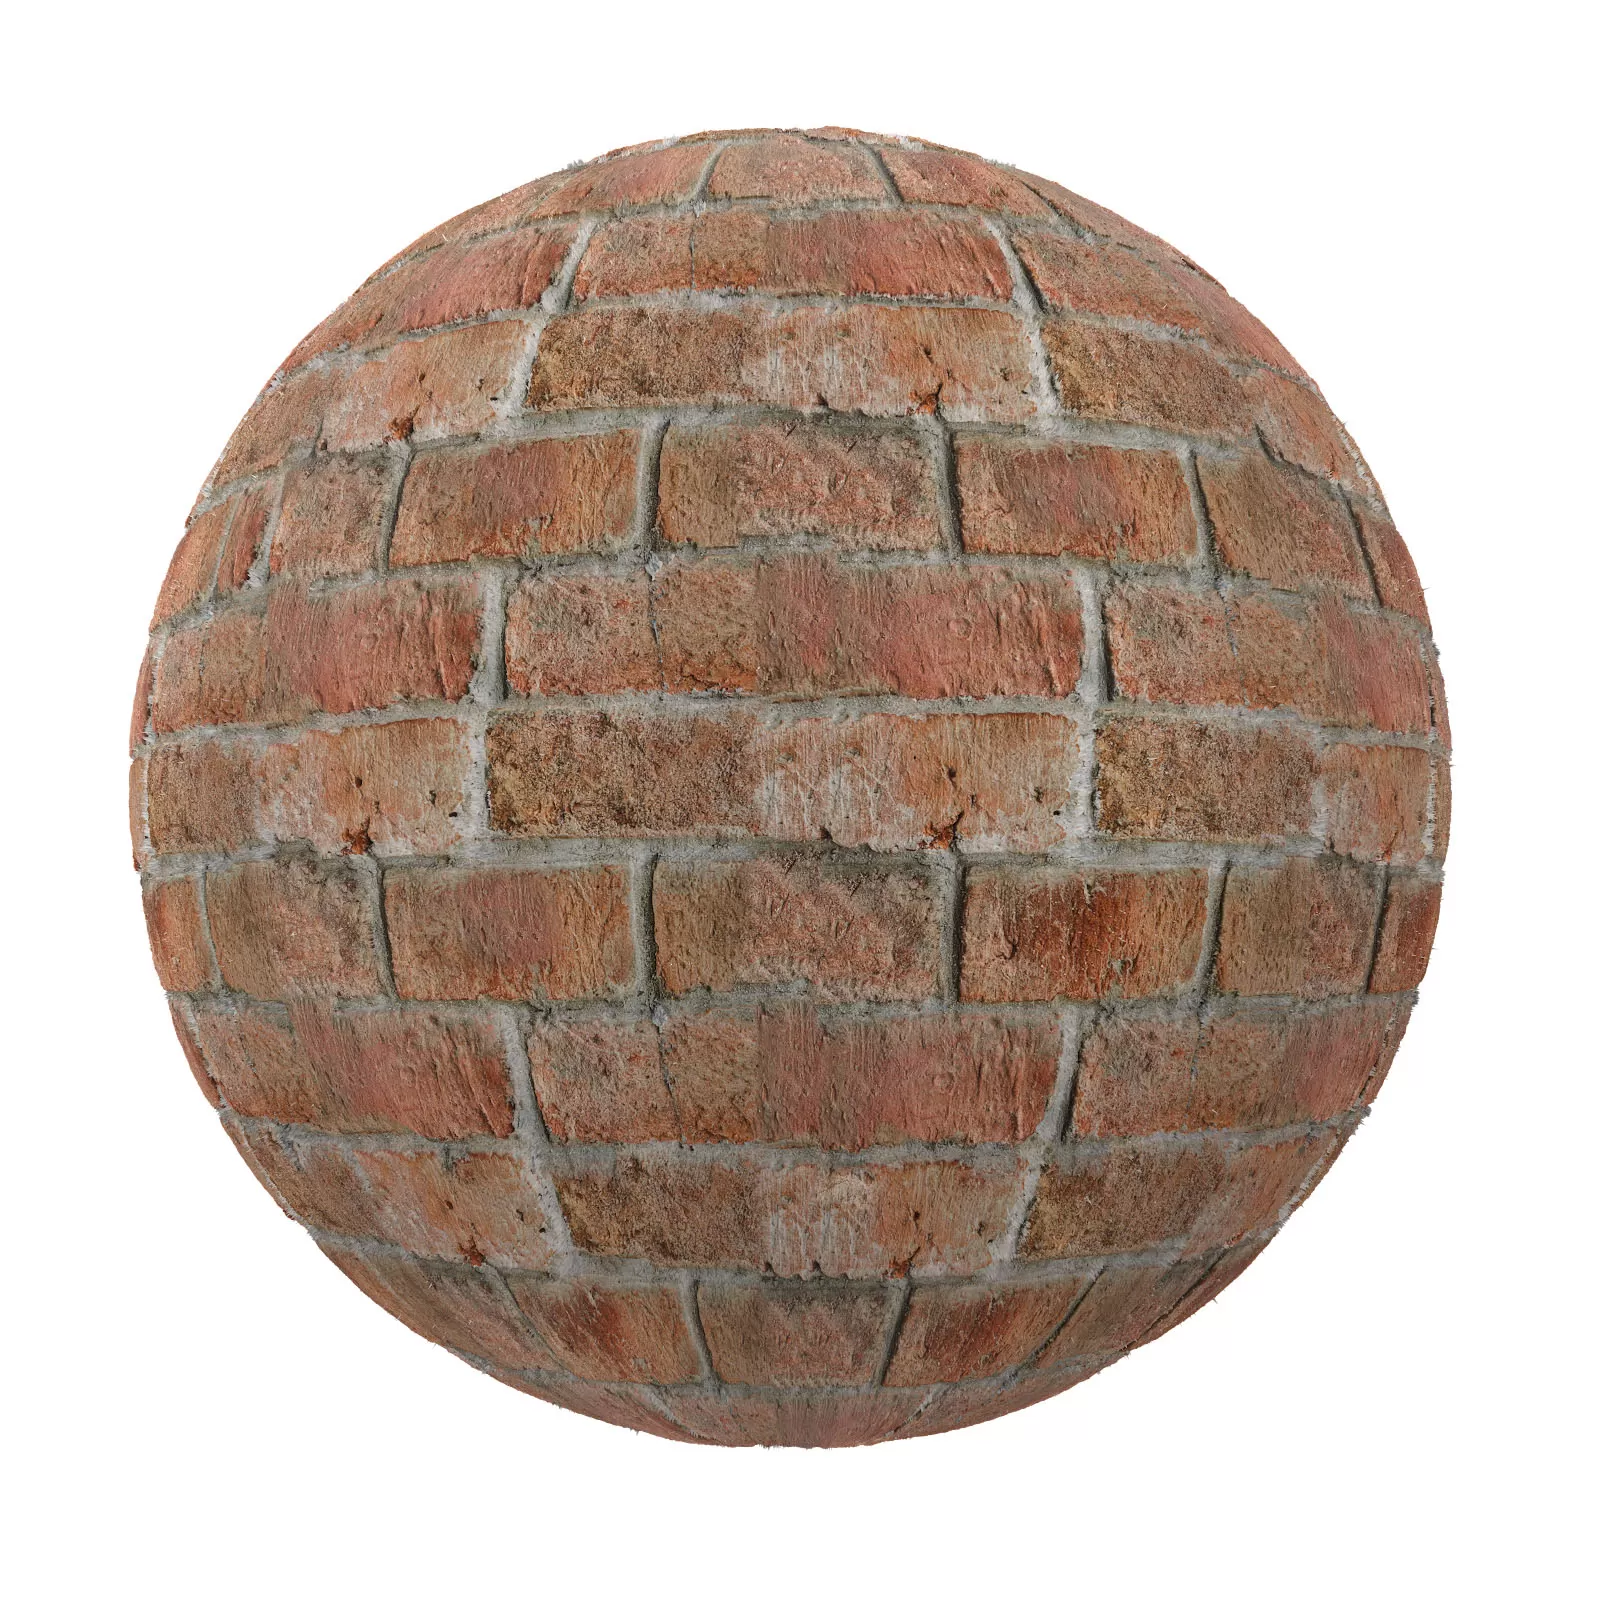 PBR CGAXIS TEXTURES – PAVEMENTS – Red Brick Pavement 8